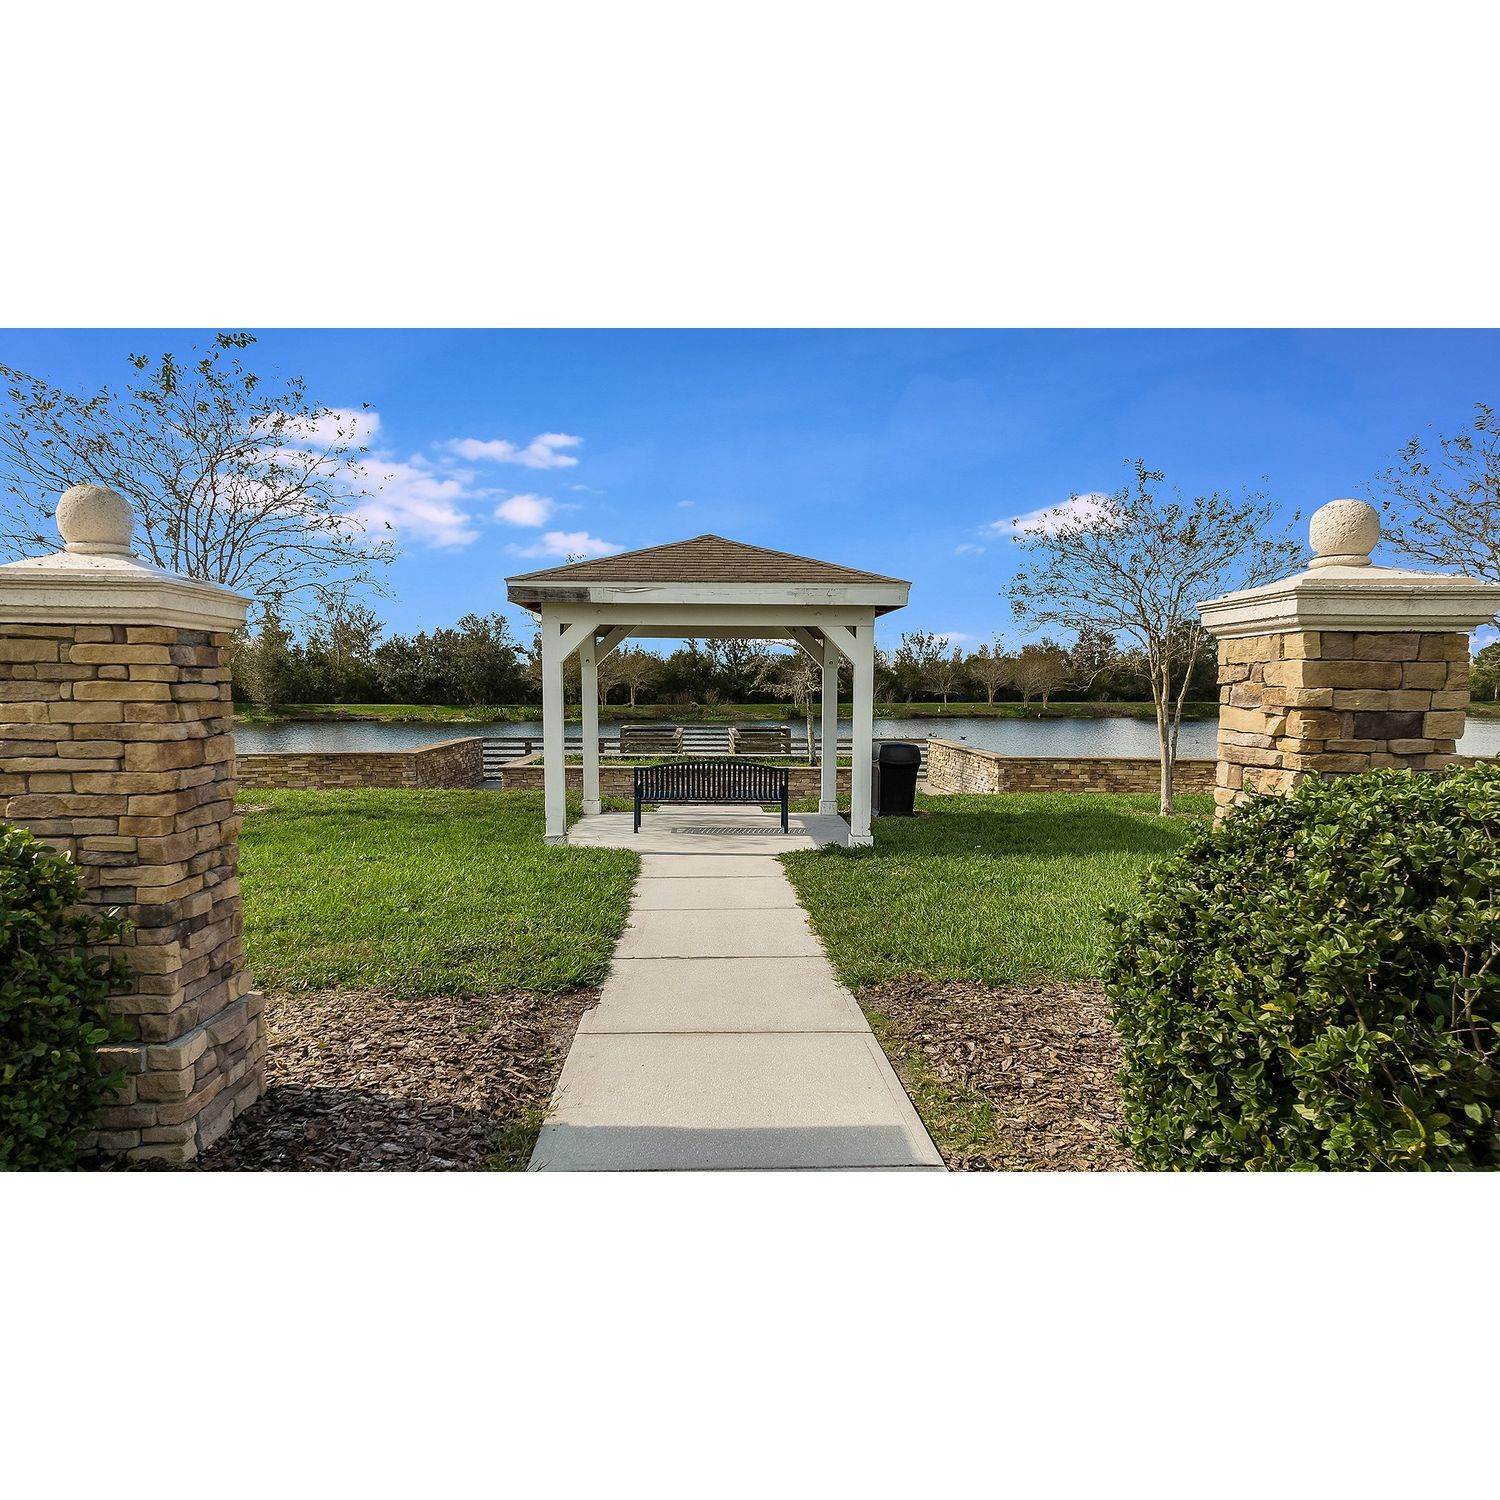 45. The Townhomes at Anthem Park building at 4590 Calvary Way, St. Cloud, FL 34769